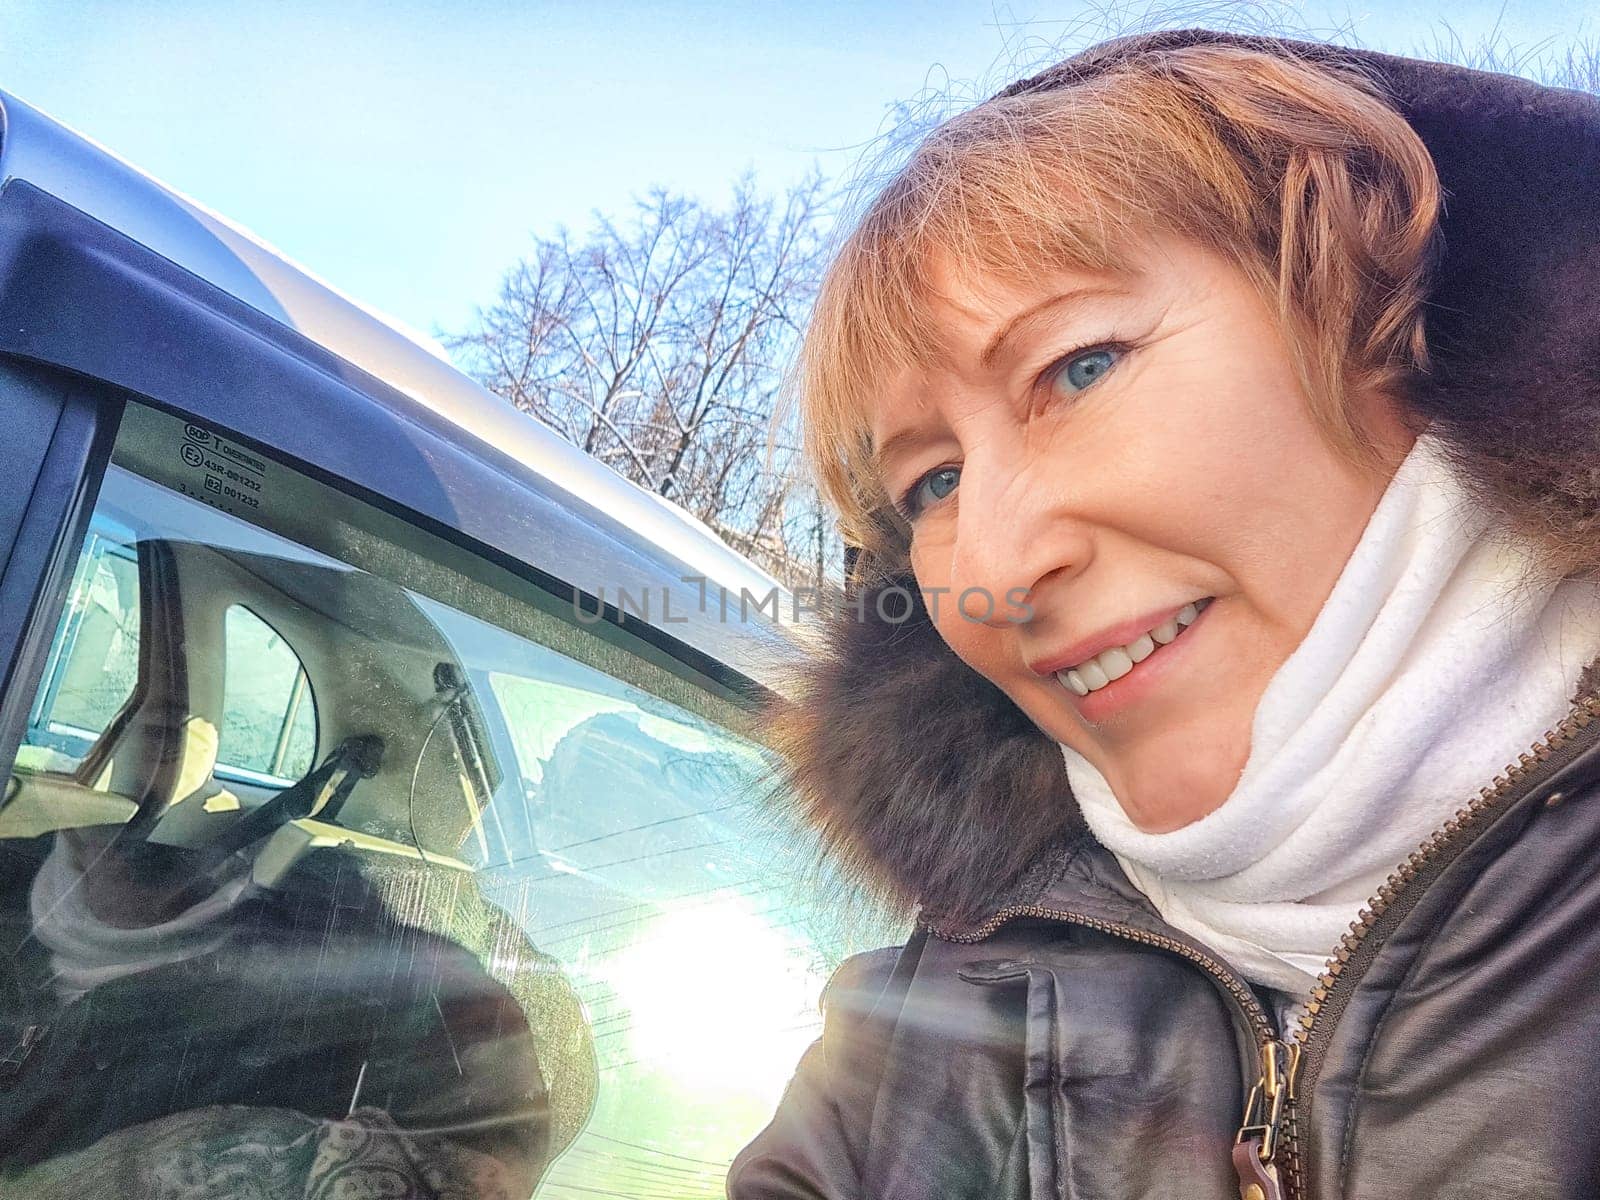 A woman with short hair is smiling at the camera while standing next to a car under clear blue skies, with the sun shining brightly